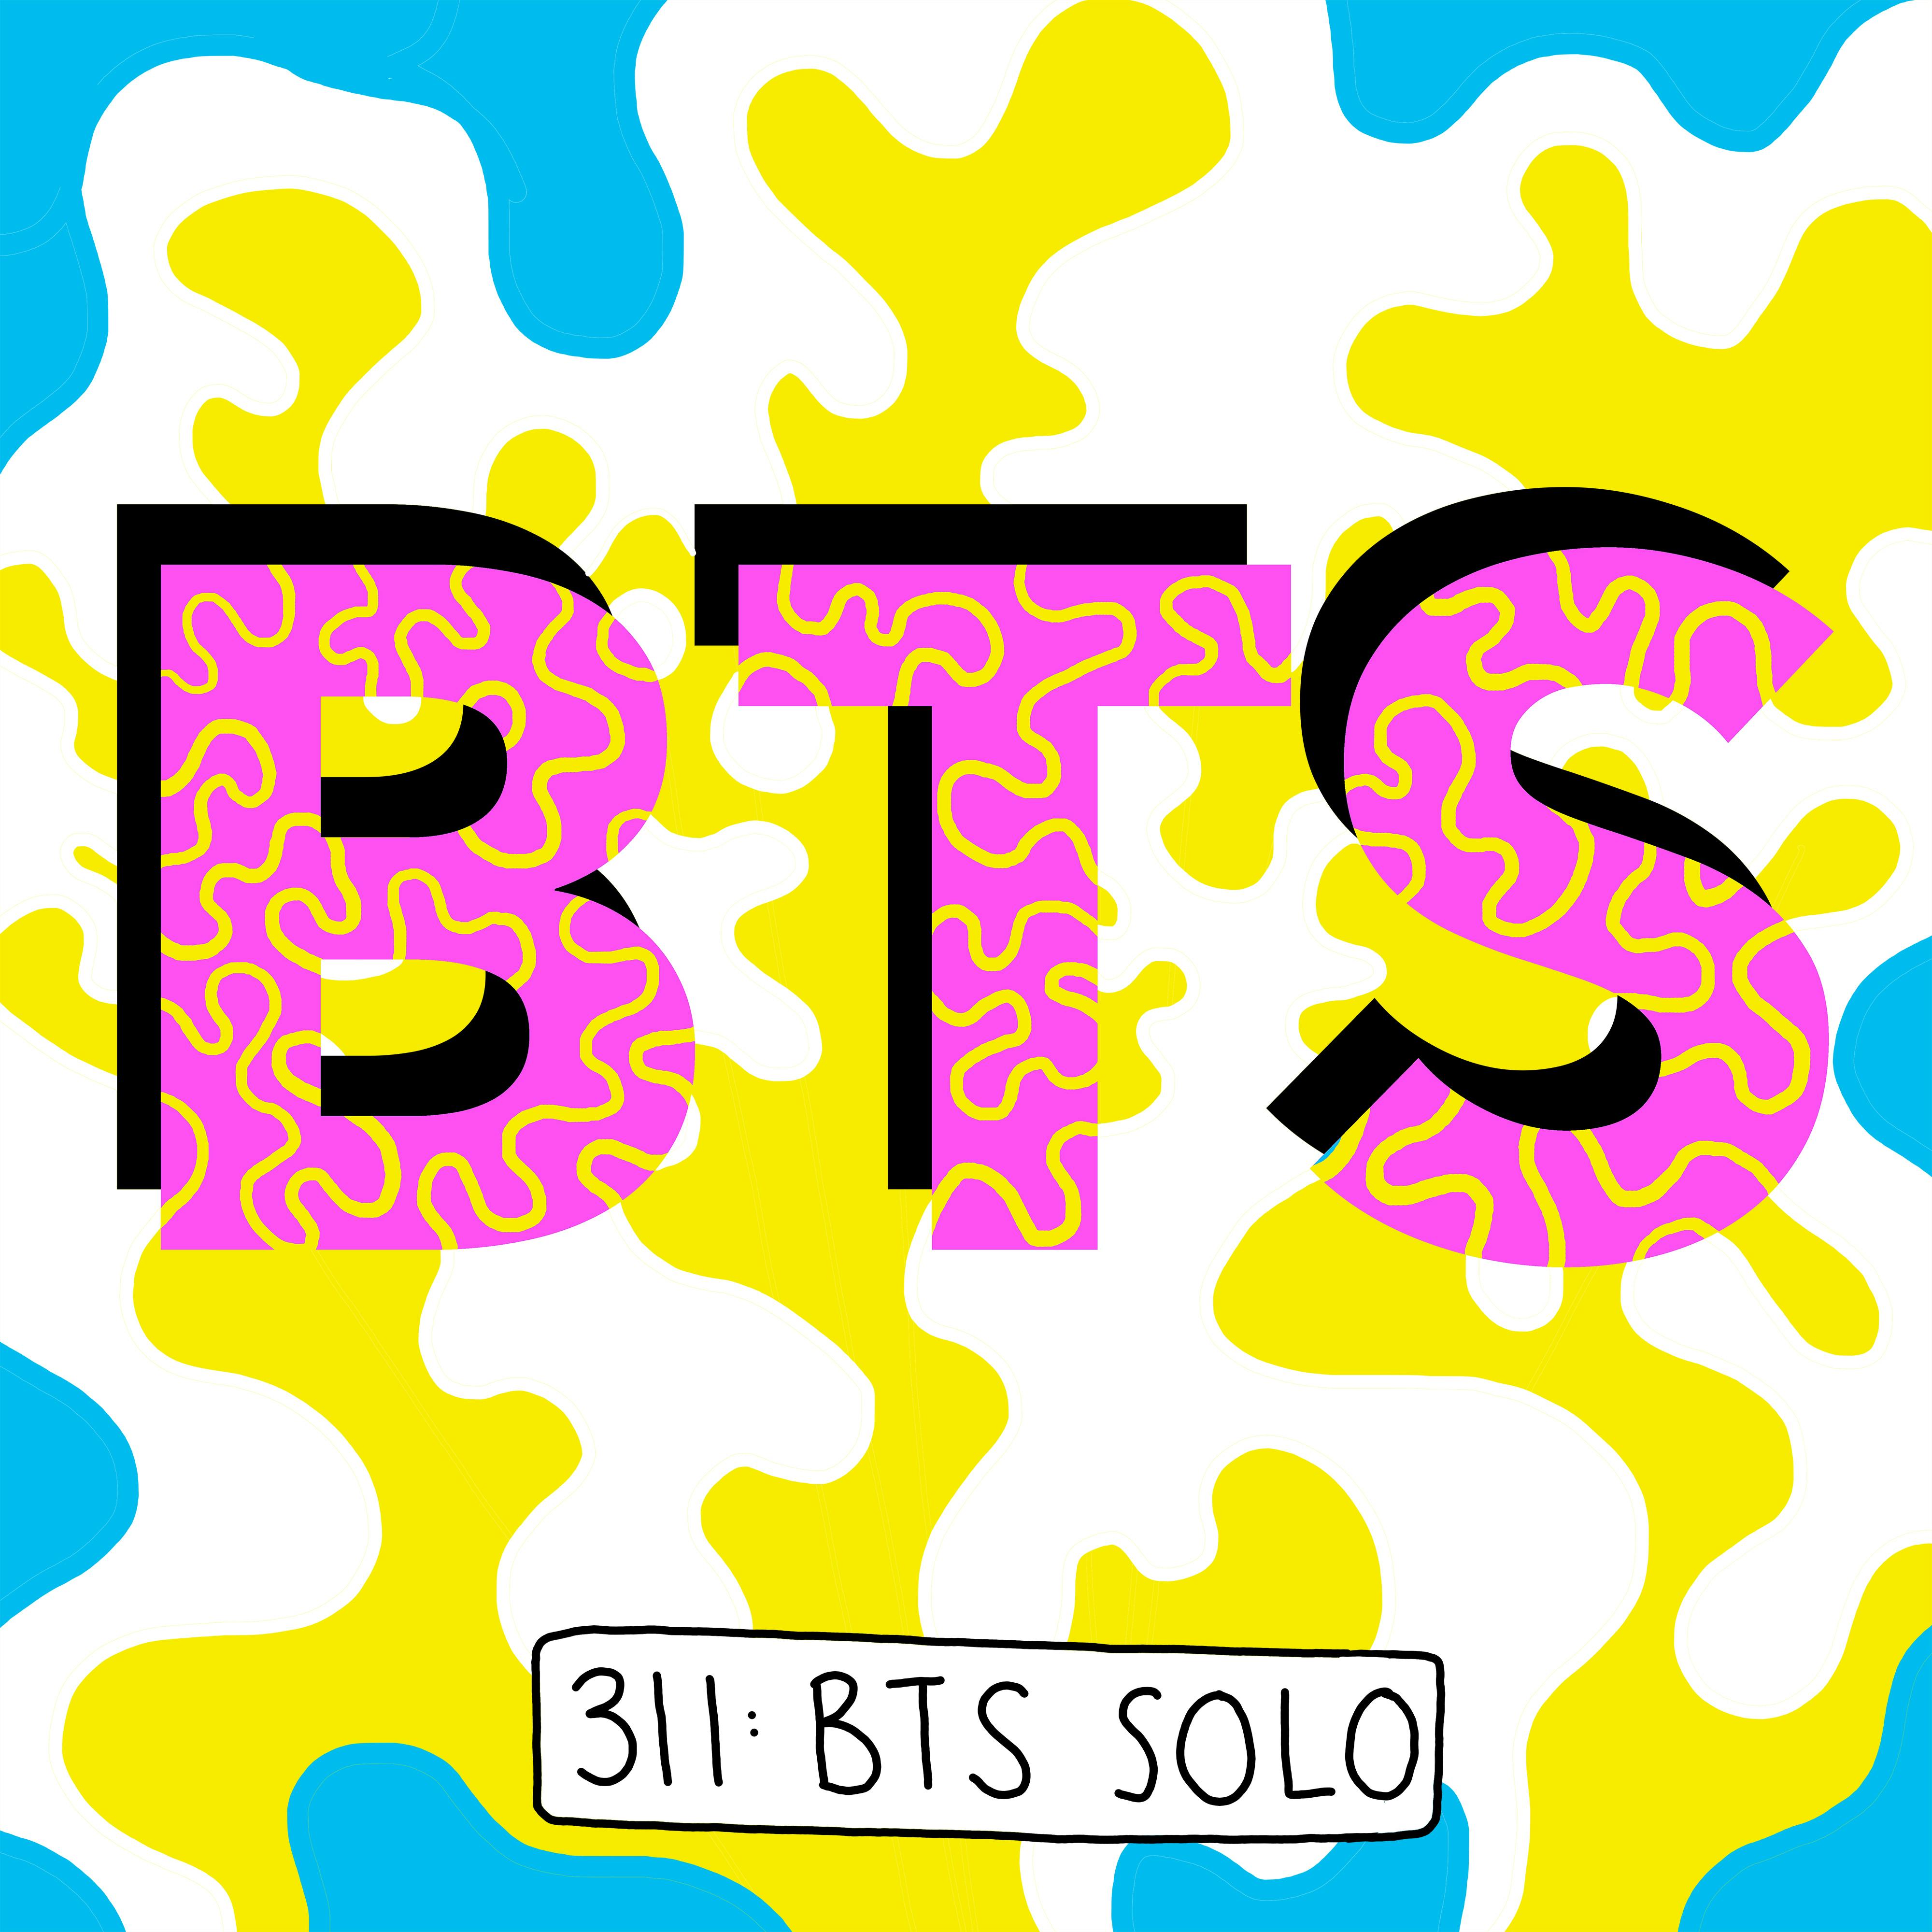 BTS goes solo together